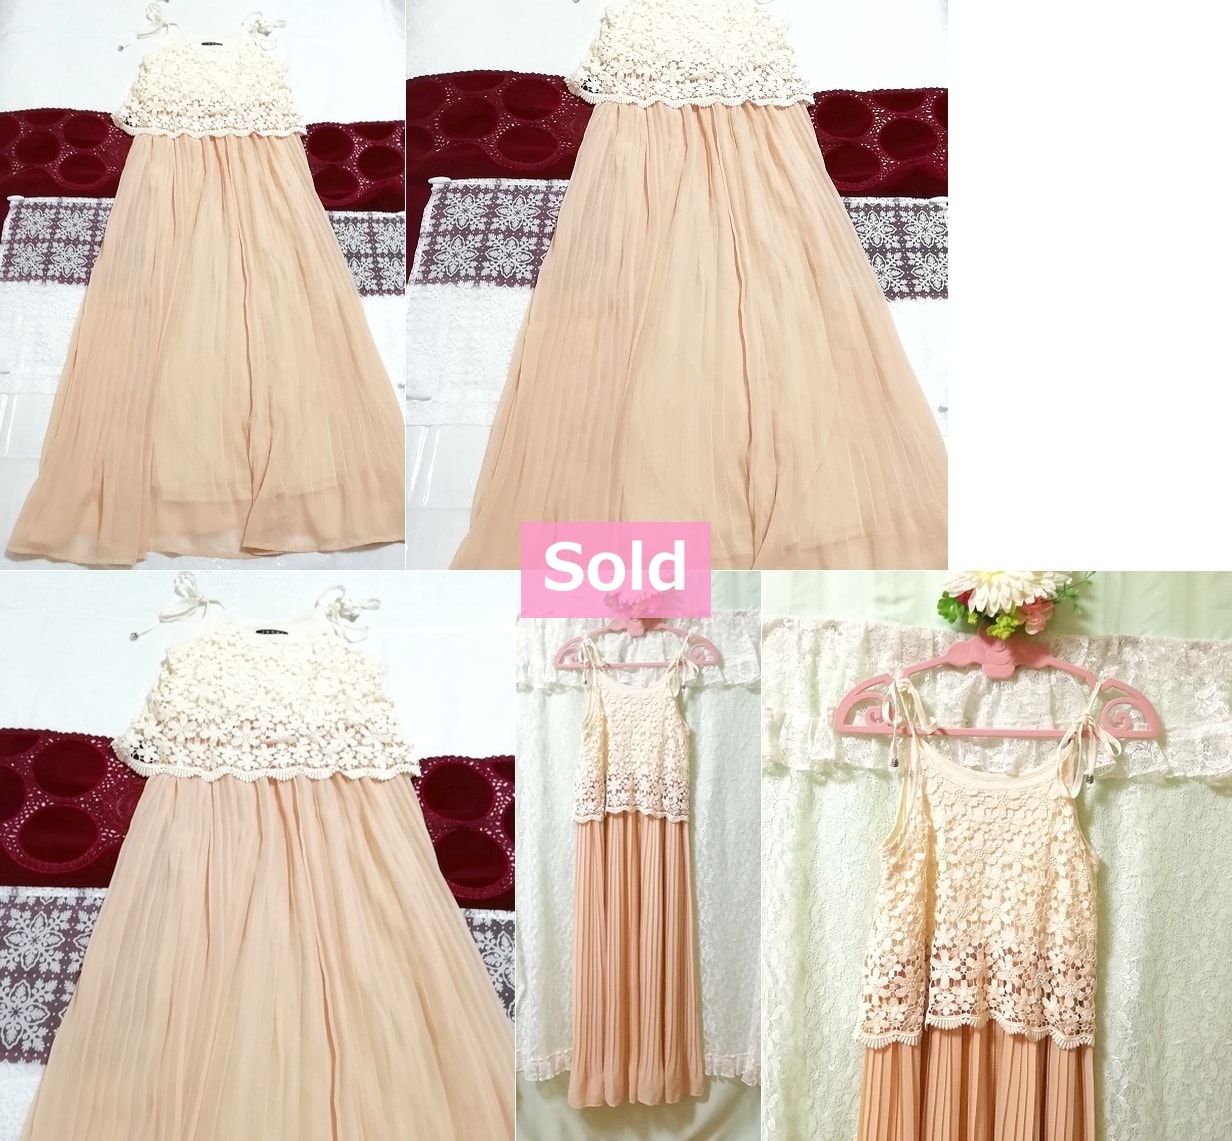 INGNI 白レースキャミソールピンクプリーツスカートマキシワンピース White lace camisole pink skirt maxi onepiece dress